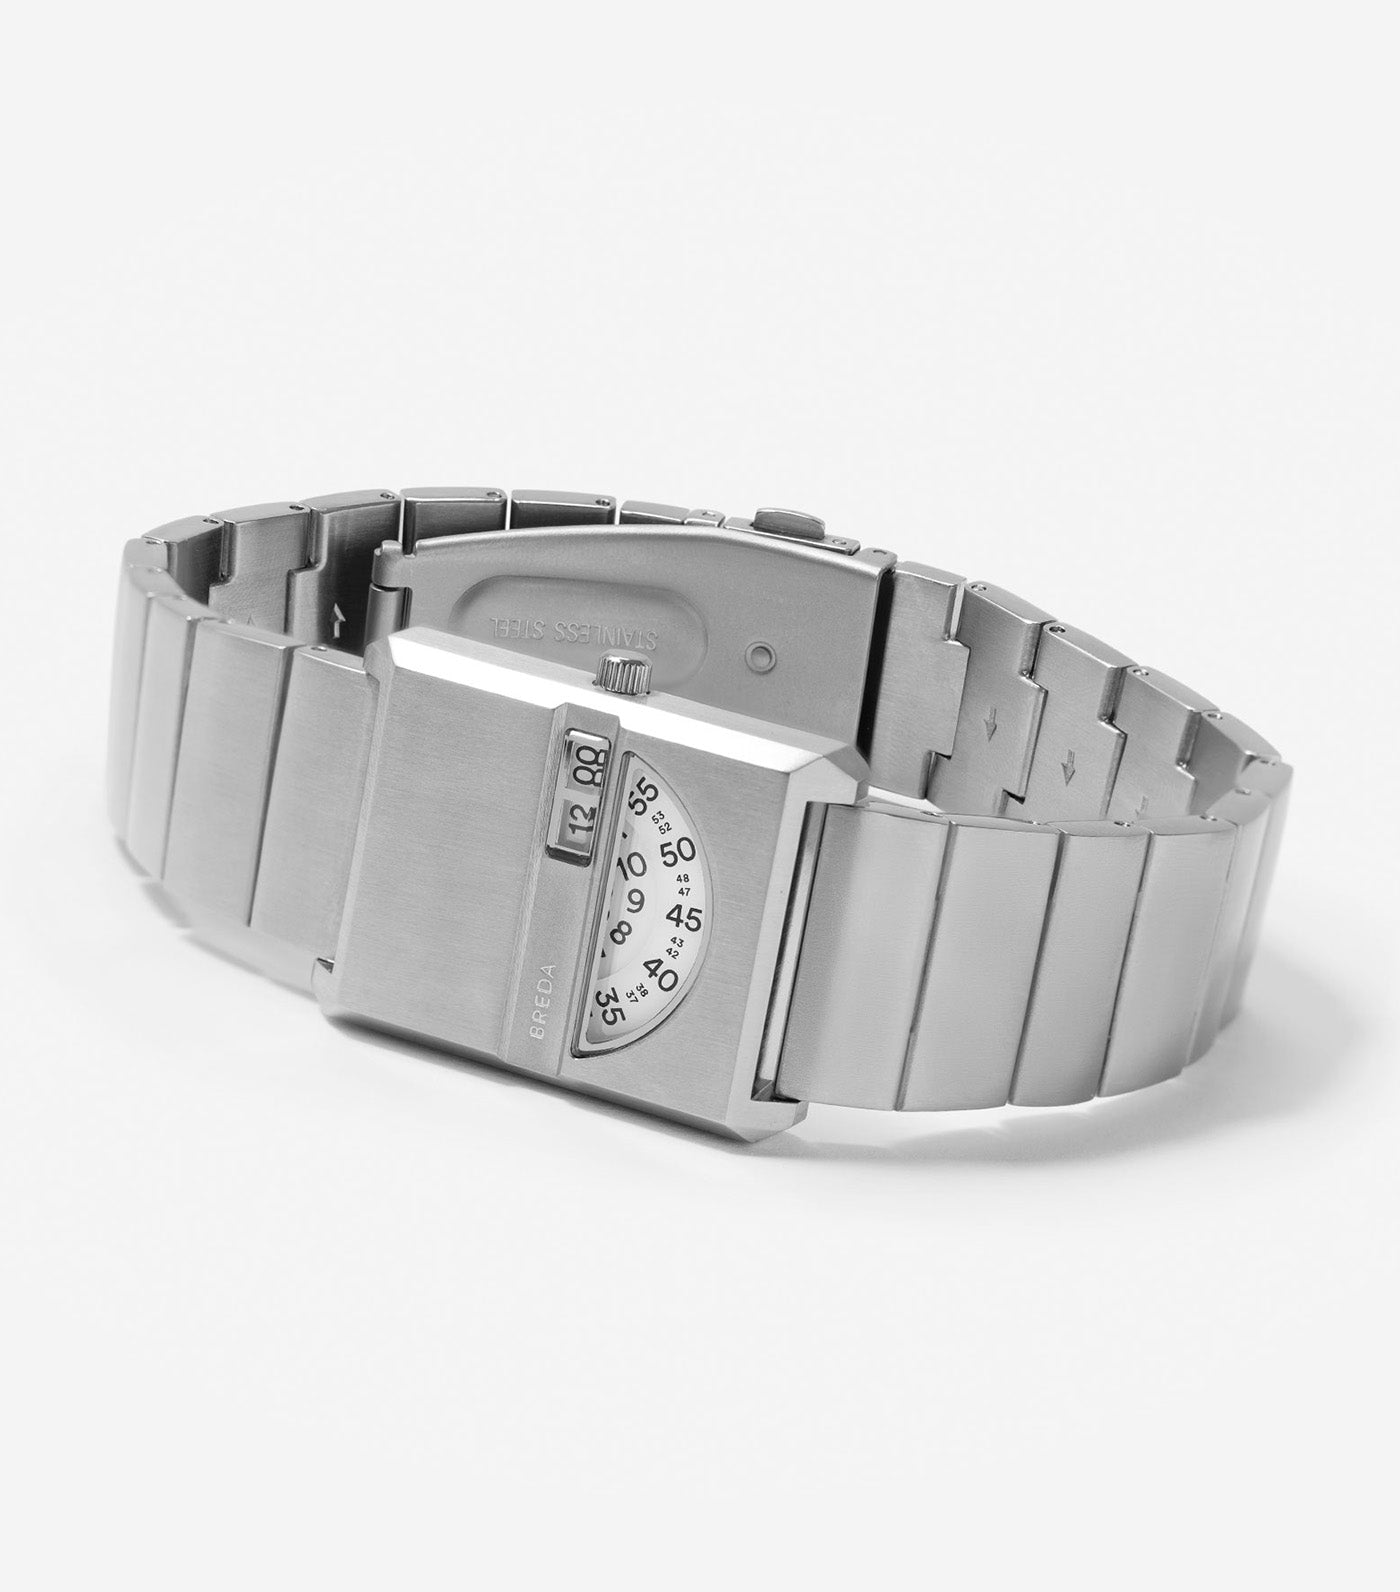 Pulse Bracelet Watch Silver and Metal